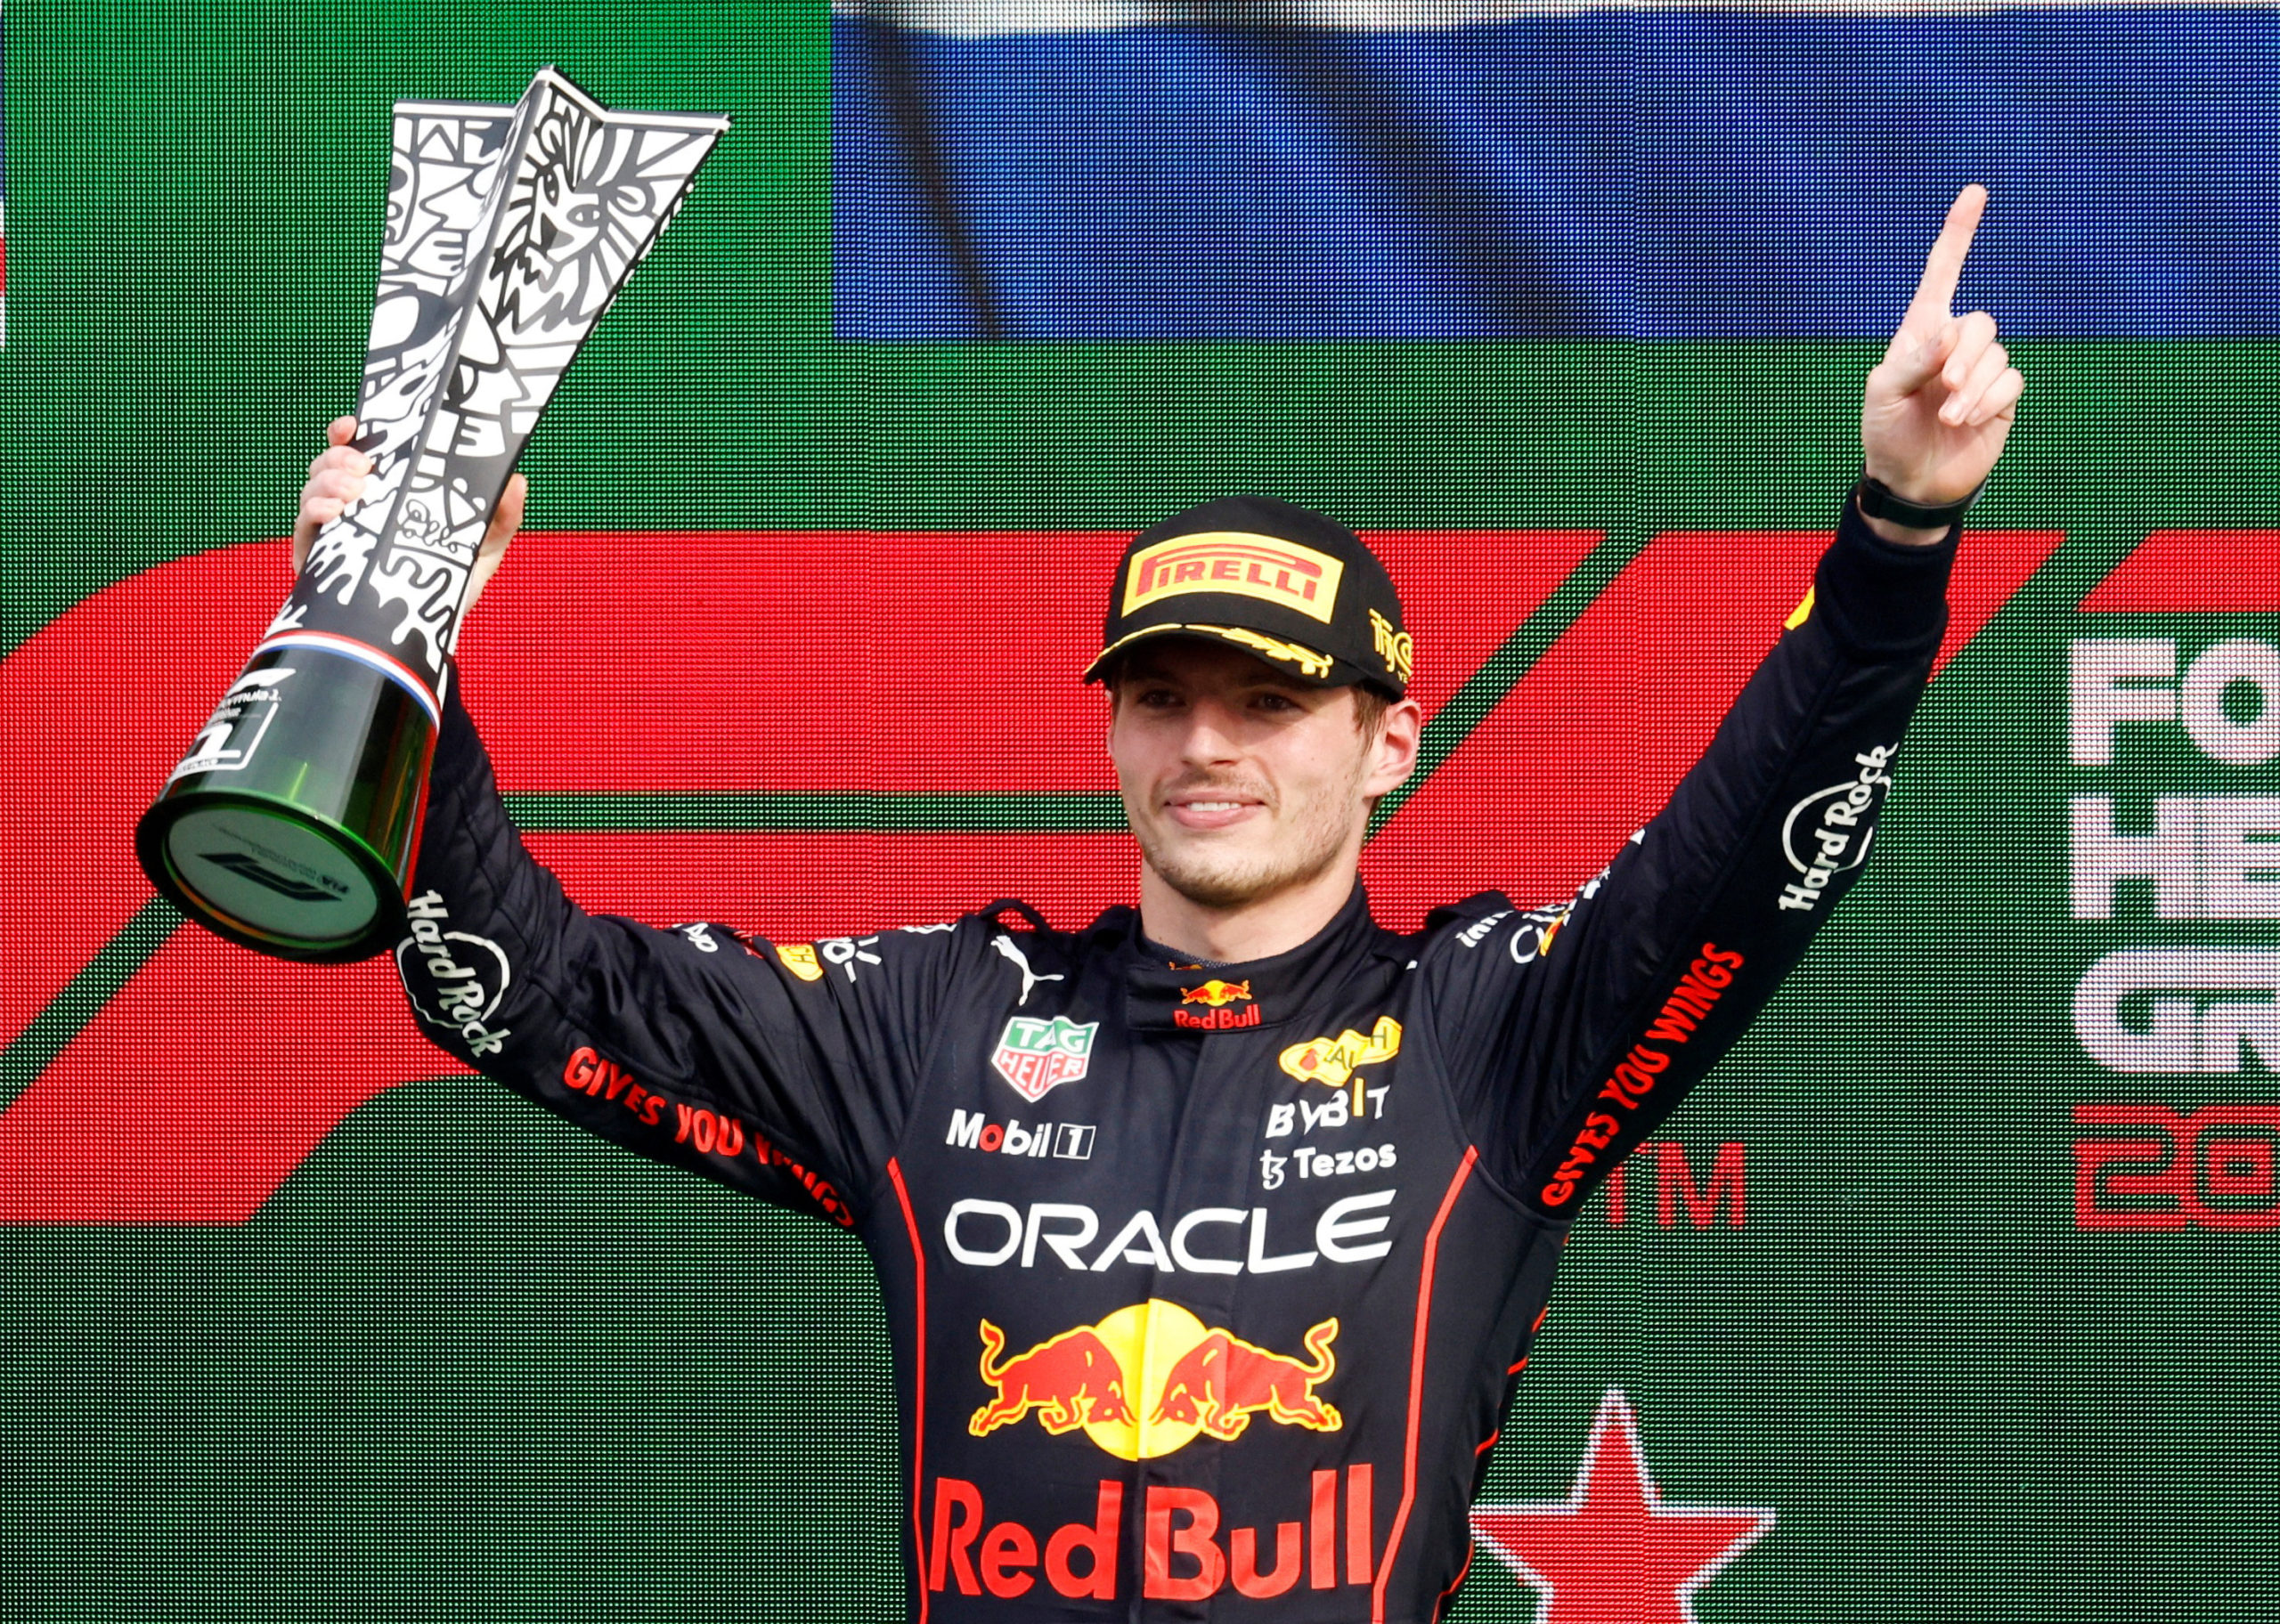 Red Bull's Max Verstappen celebrates on the podium with the trophy after winning the Dutch Grand Prix 